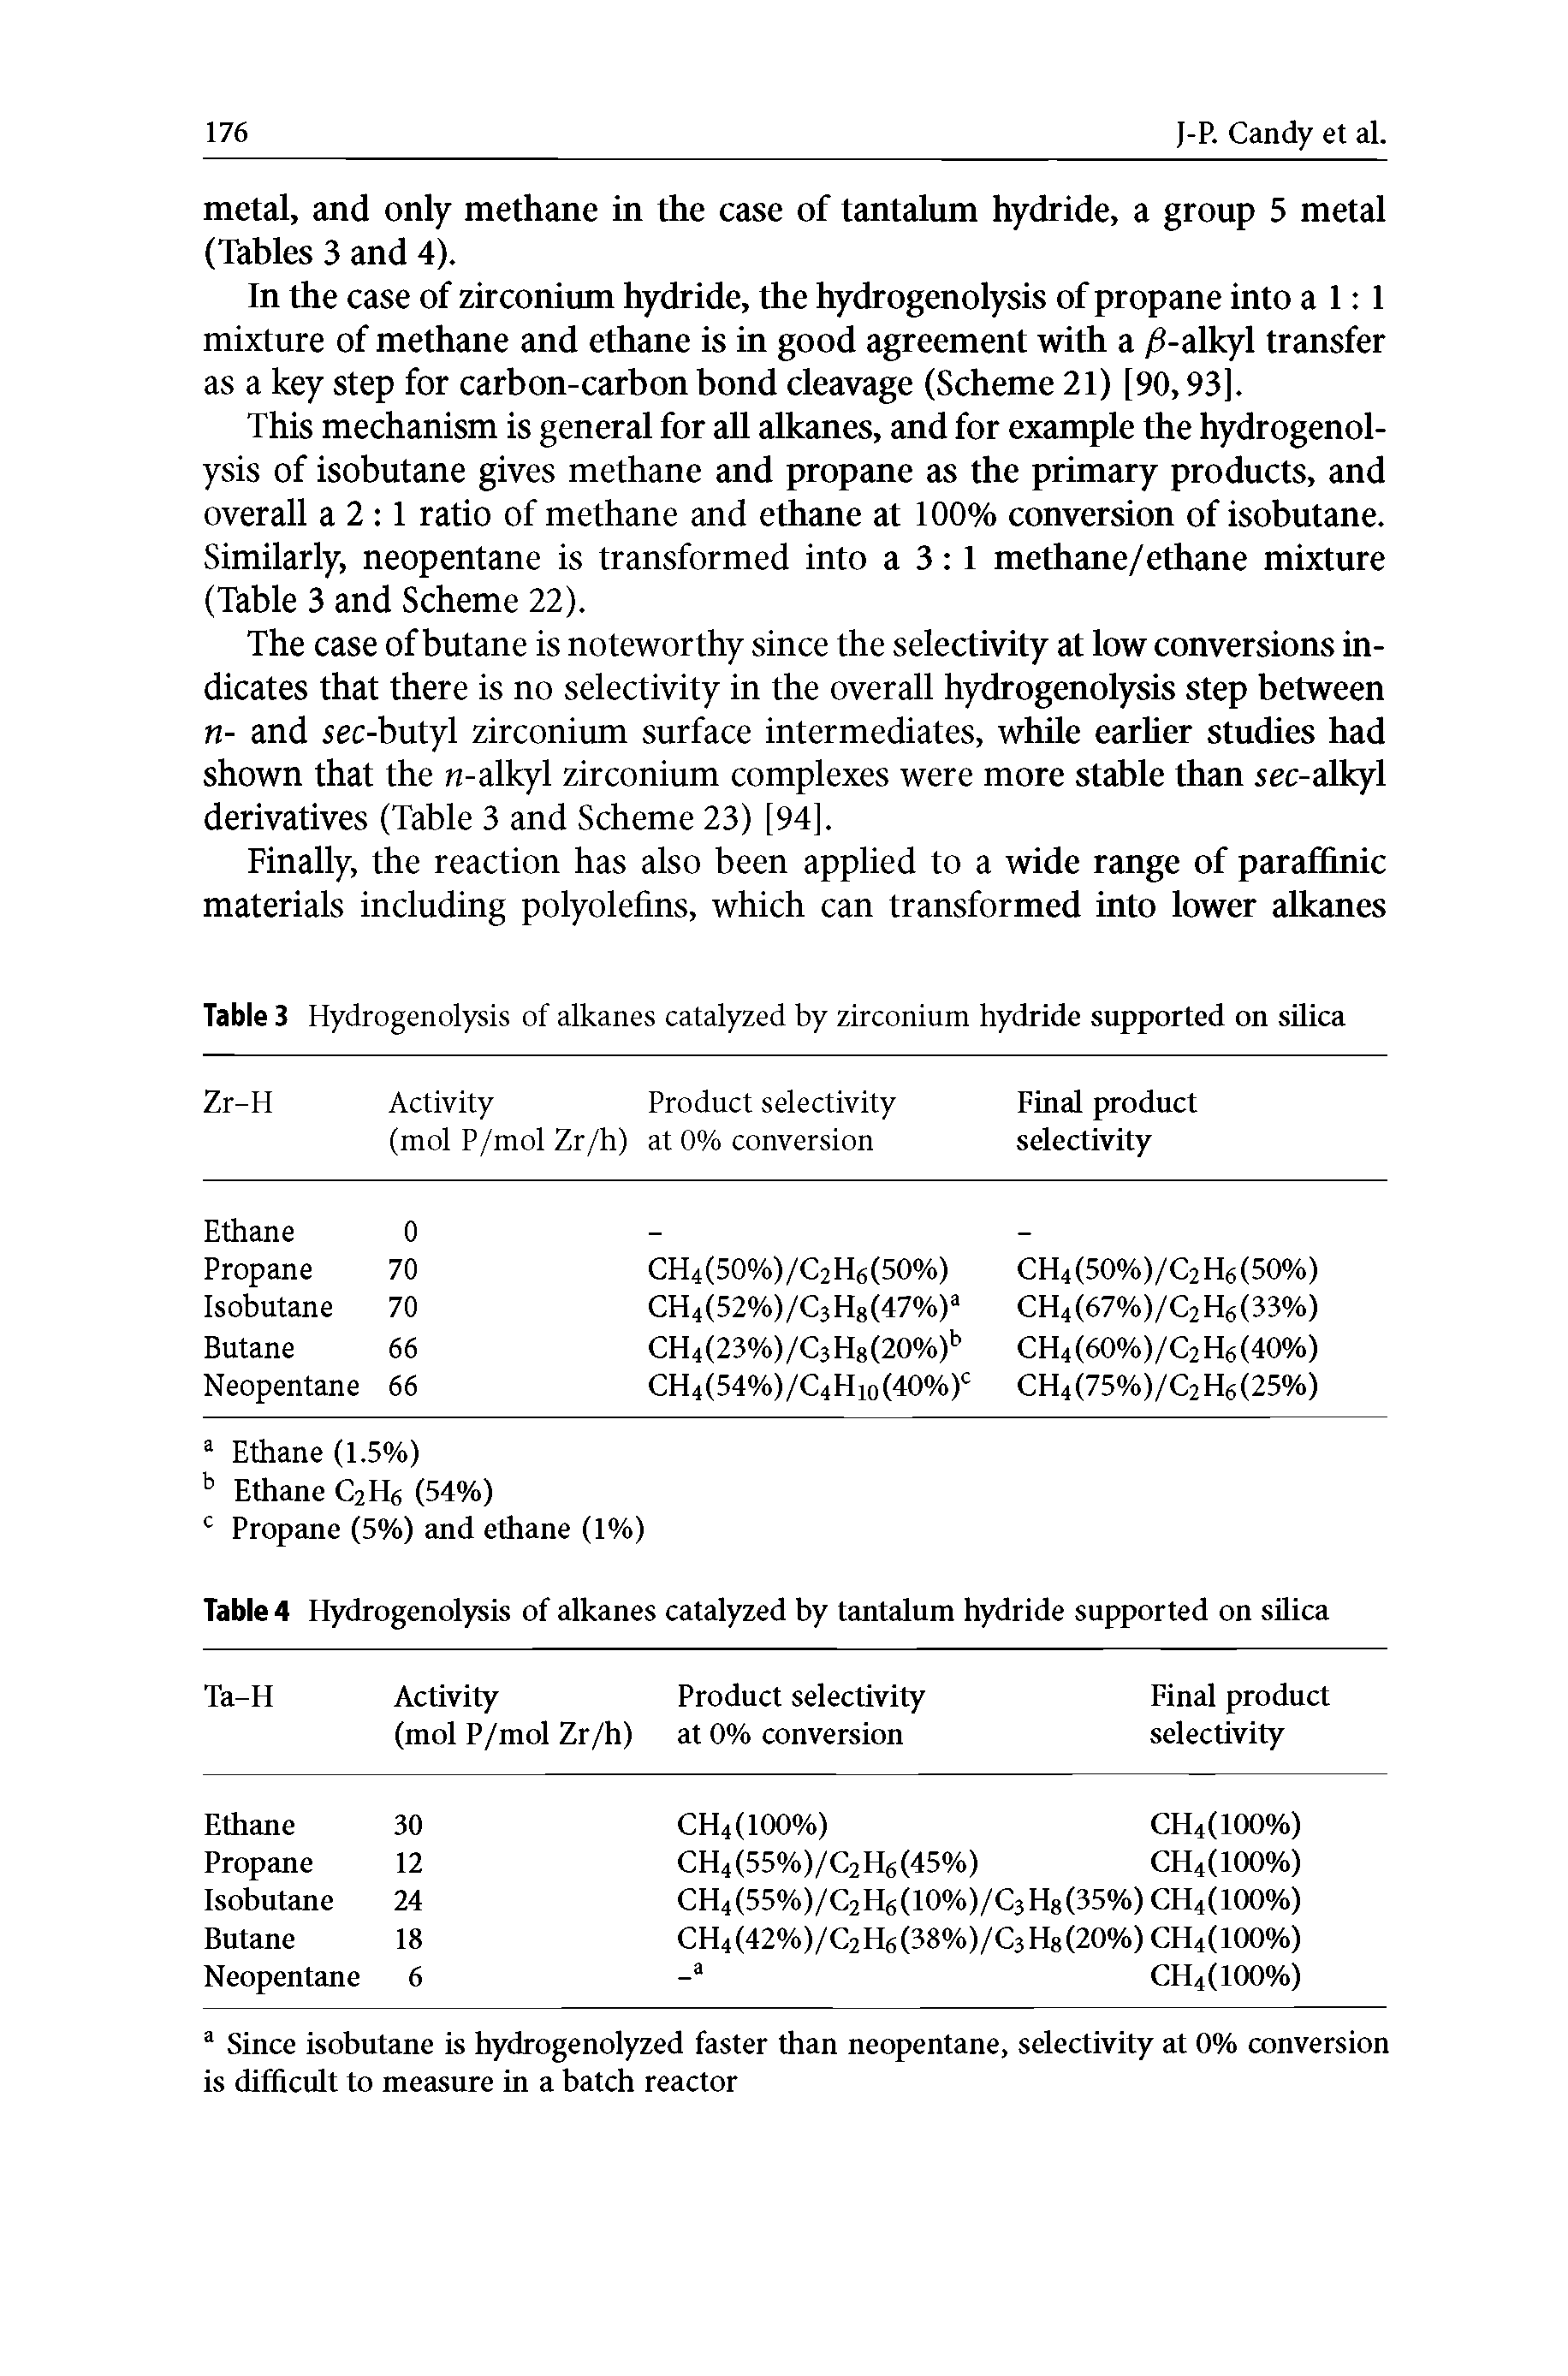 Table 4 Hydrogenolysis of alkanes catalyzed by tantalum hydride supported on silica...